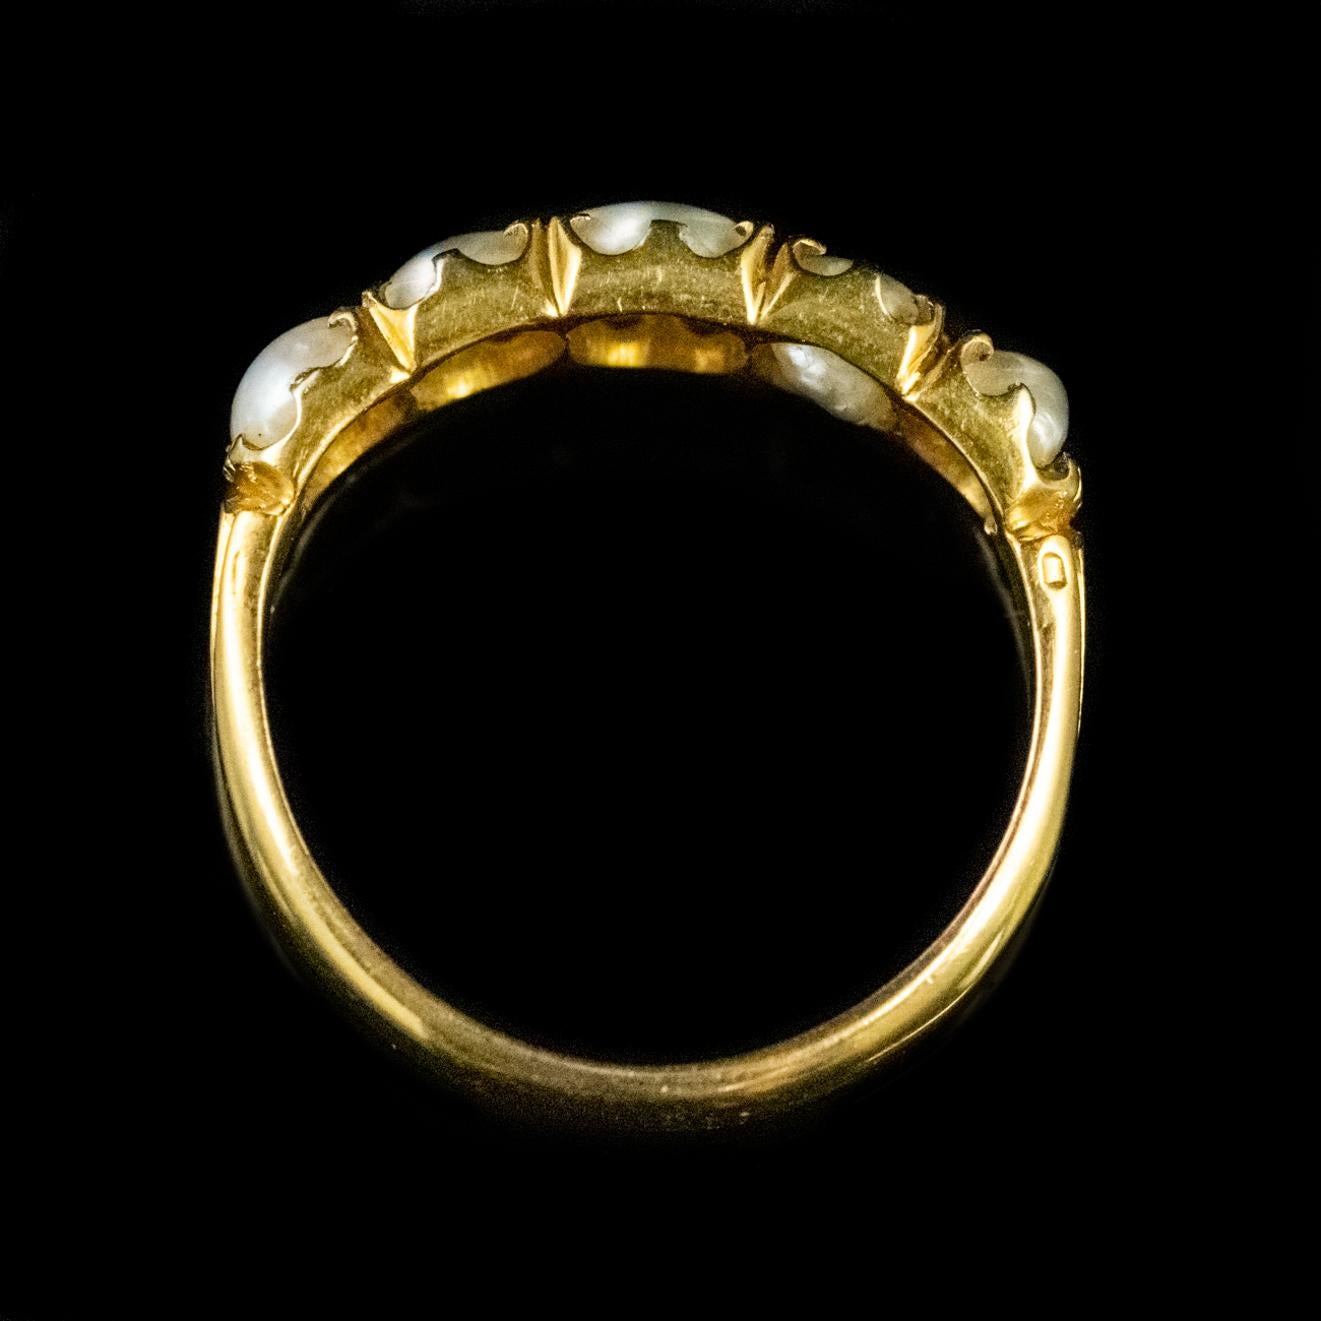 Antique Victorian Natural Pearl Five-Stone Ring 18 Carat Gold, circa 1860 For Sale 1